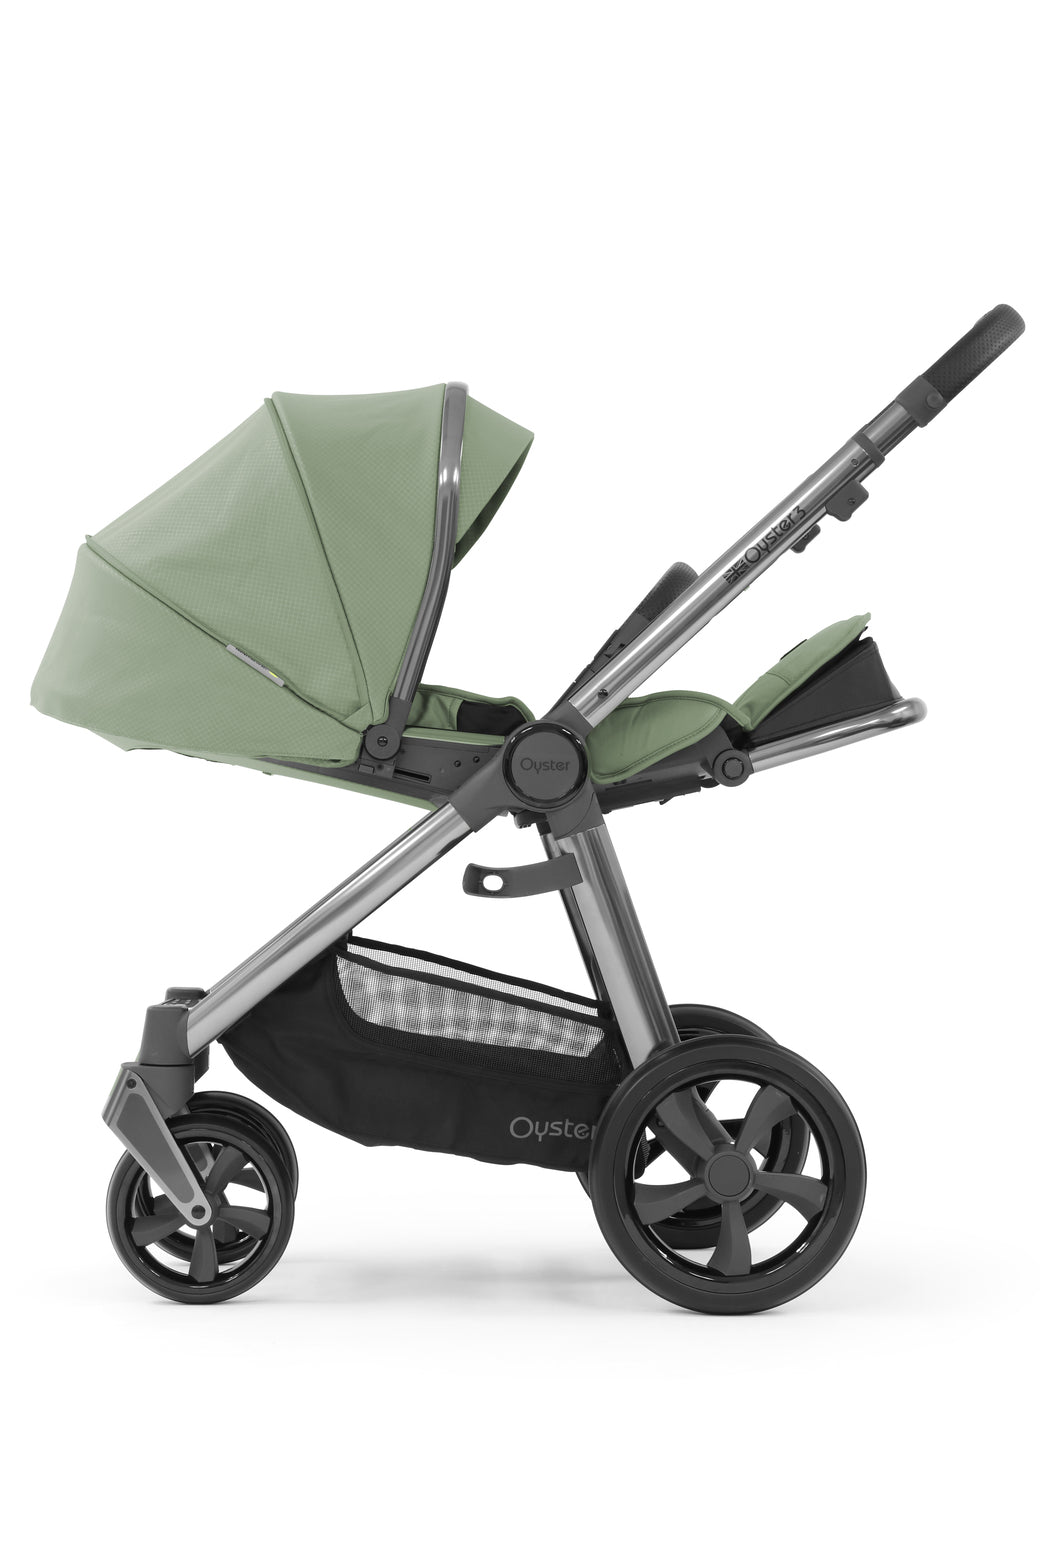 Babystyle Oyster 3 Essential 5 Piece Travel System Bundle With Pebble 360 - Spearmint - For Your Little One